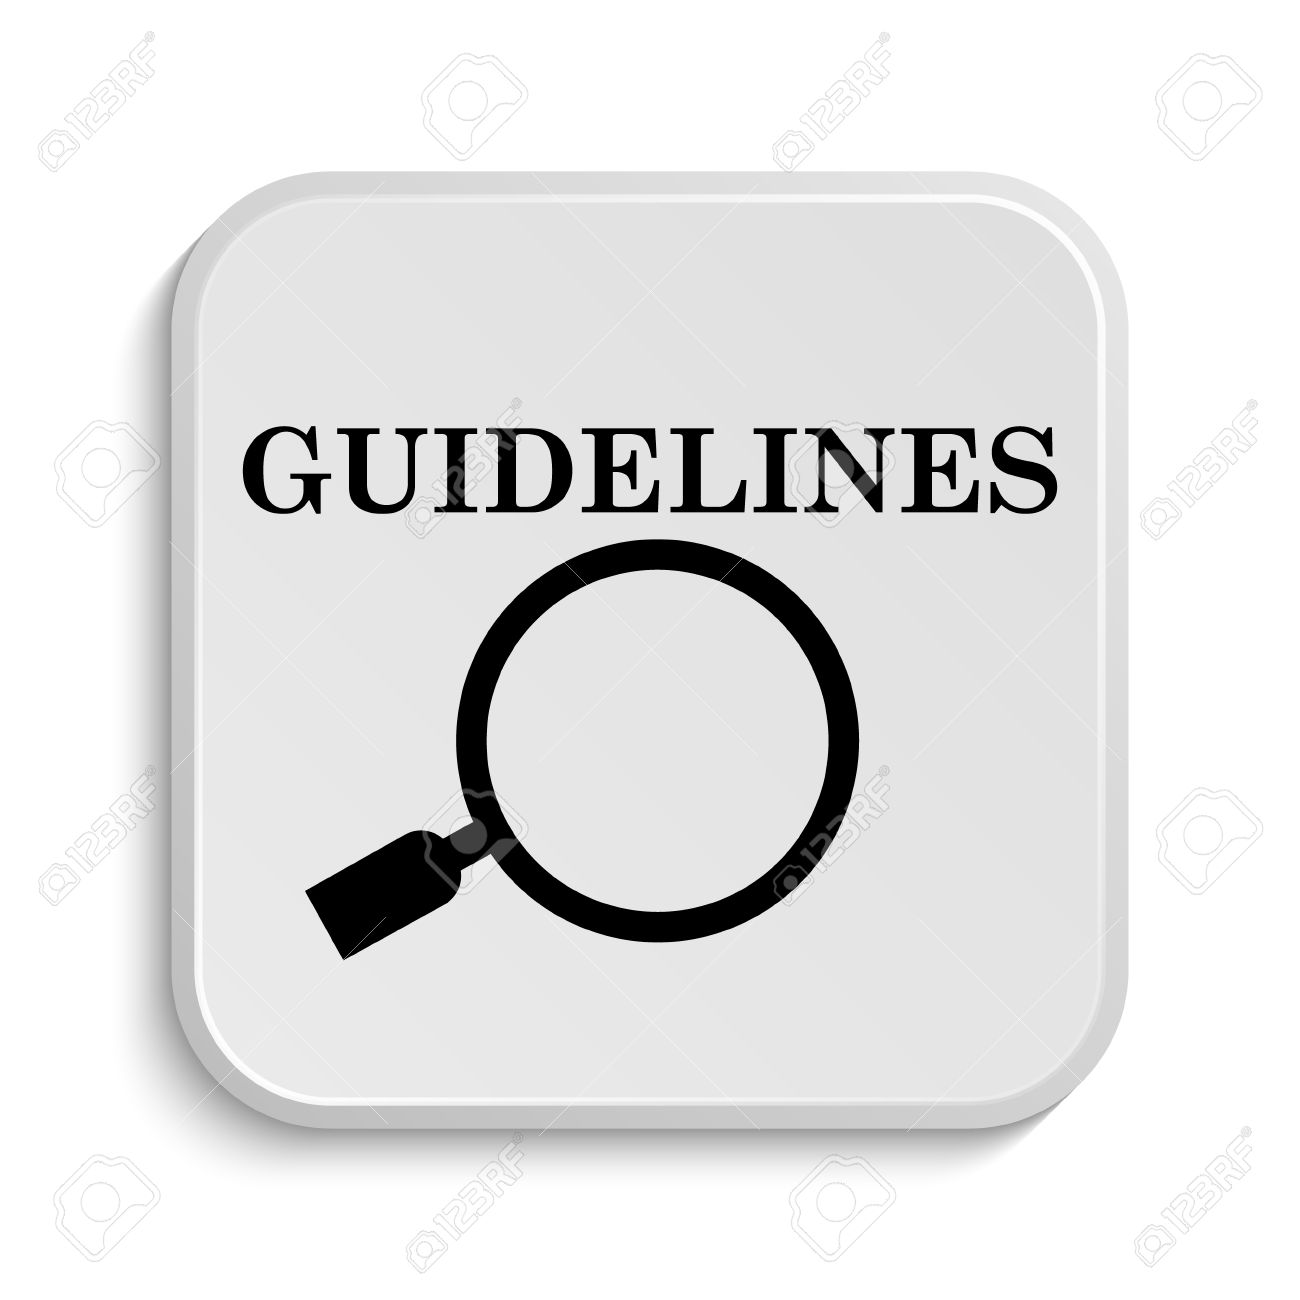 Guidelines Icon Inter Button On White Background Stock Photo